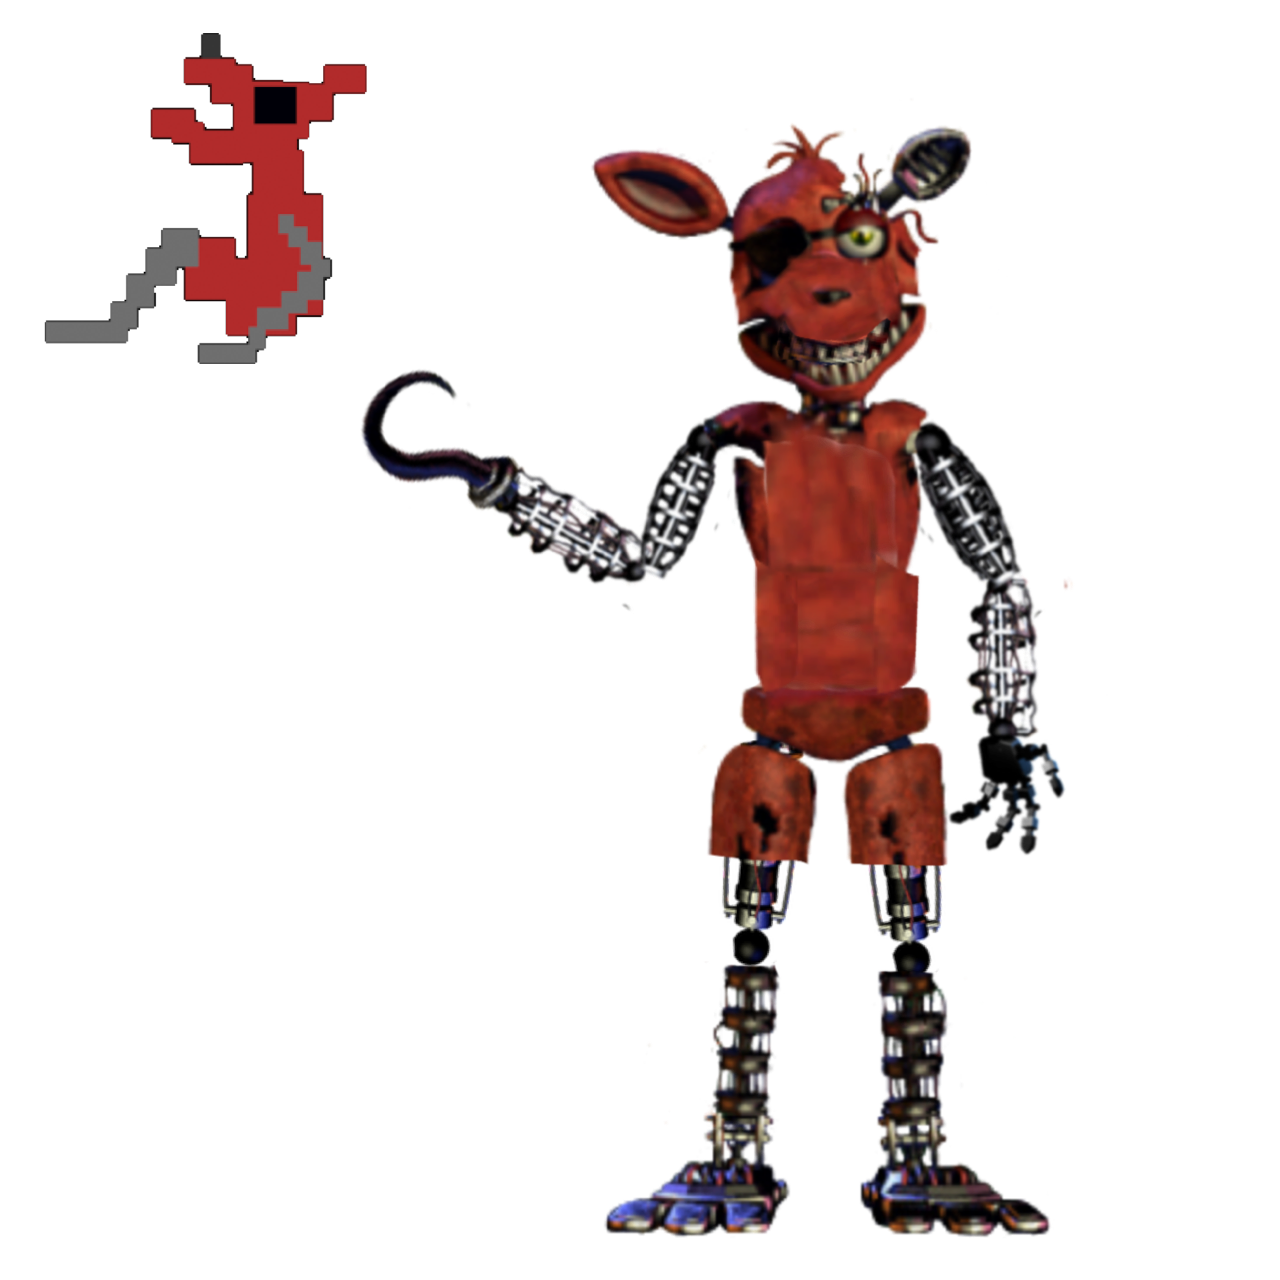 Minigame Withered Foxy by DTWFan on DeviantArt